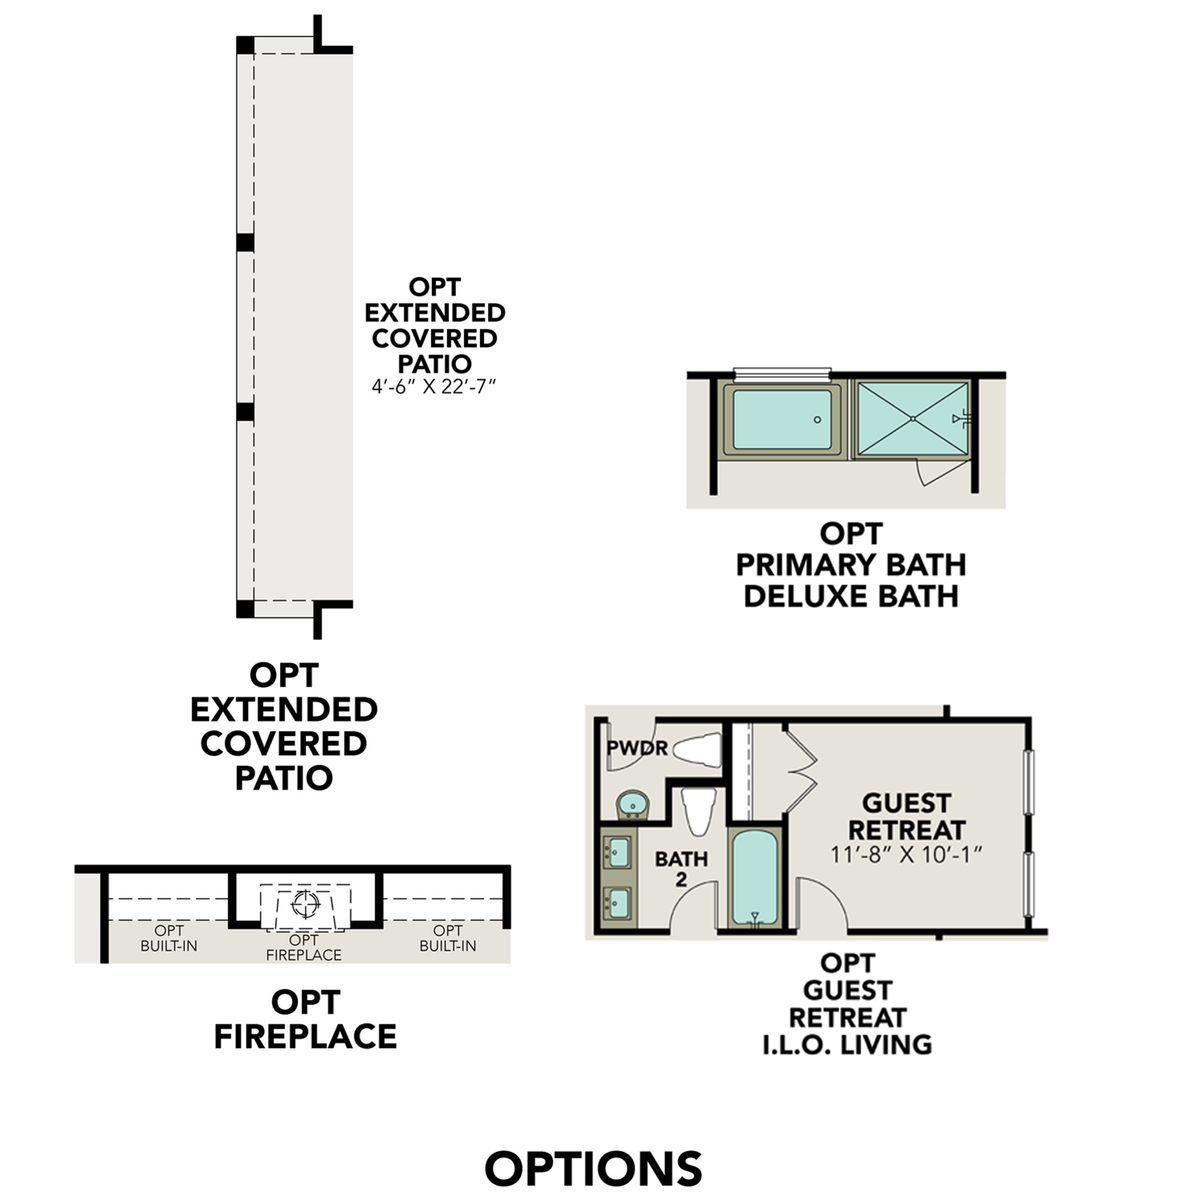 2 - The Rockford D floor plan layout for 148 Mason Lane in Davidson Homes' The Reserve at Potranco Oaks community.